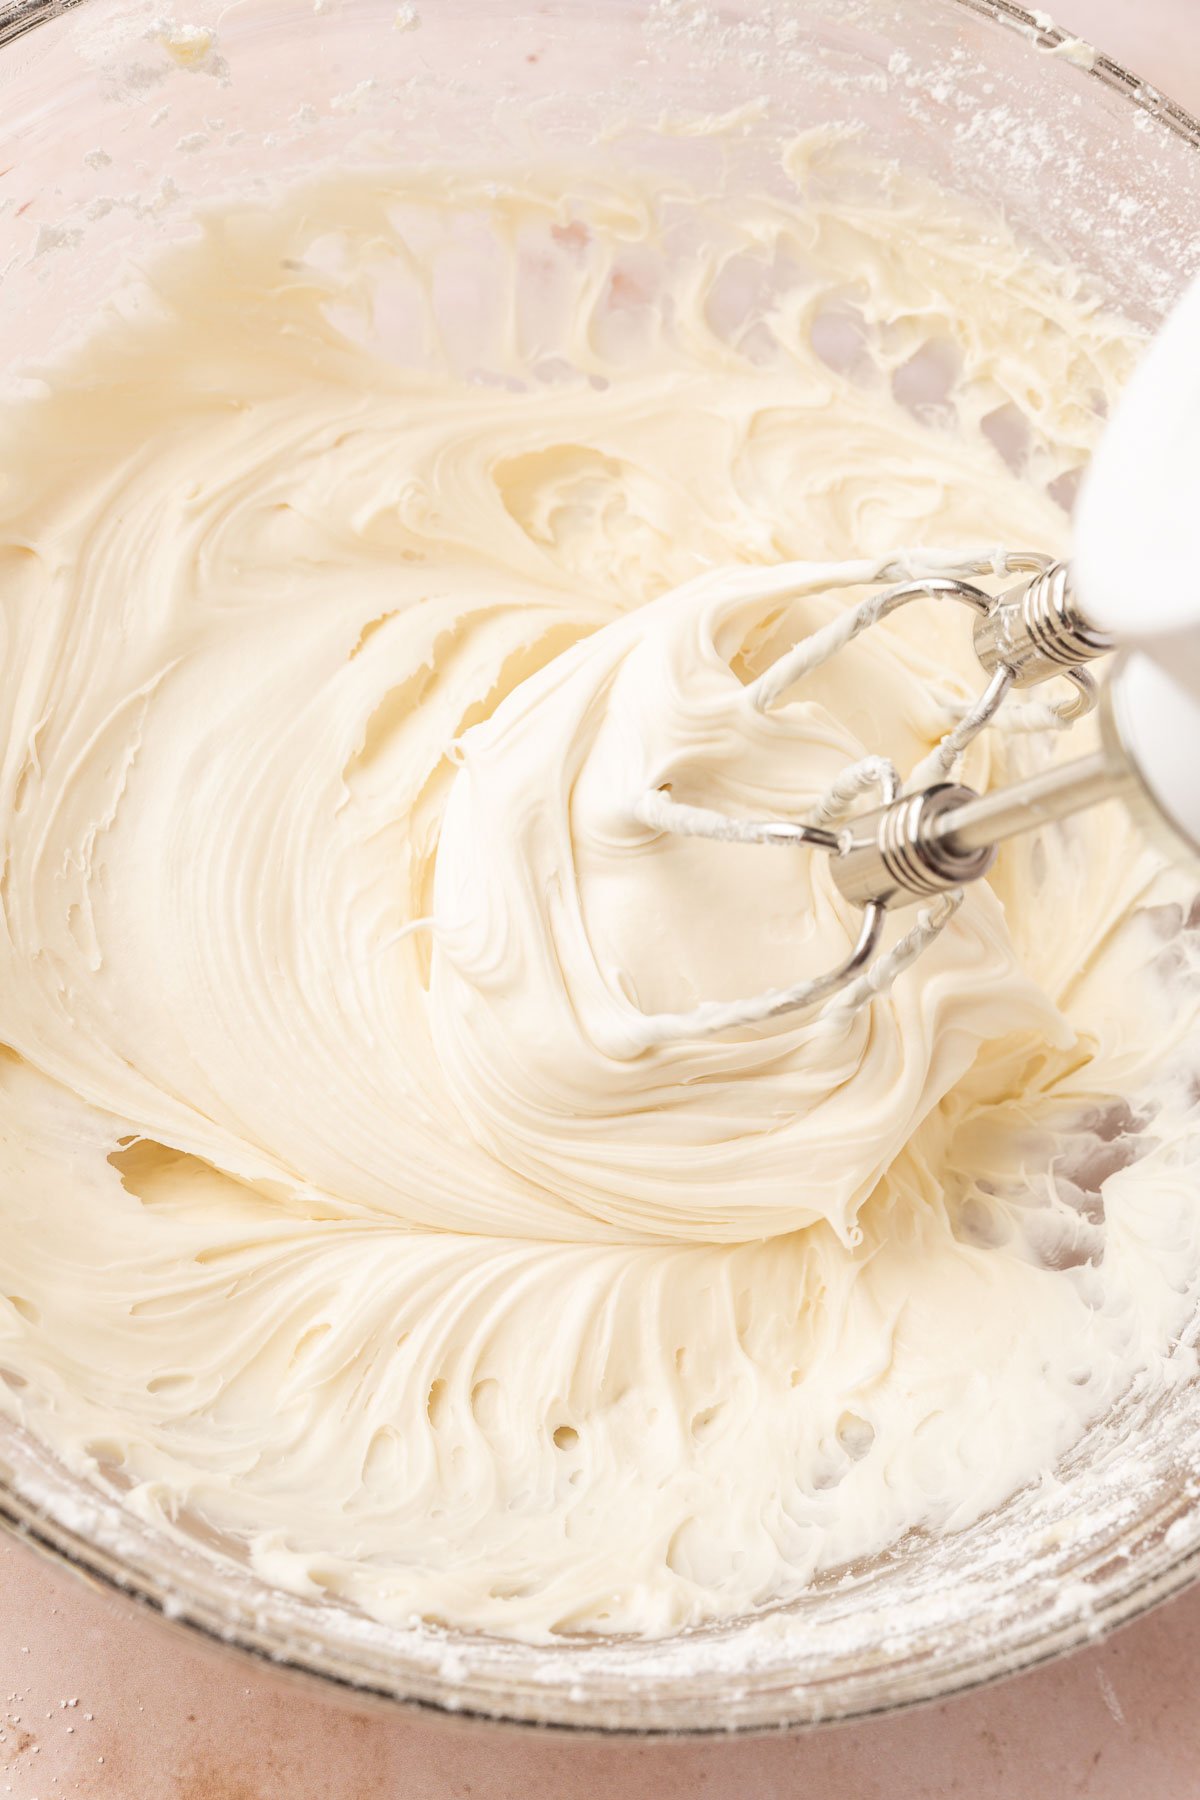 An electric mixer blending together cream cheese frosting.